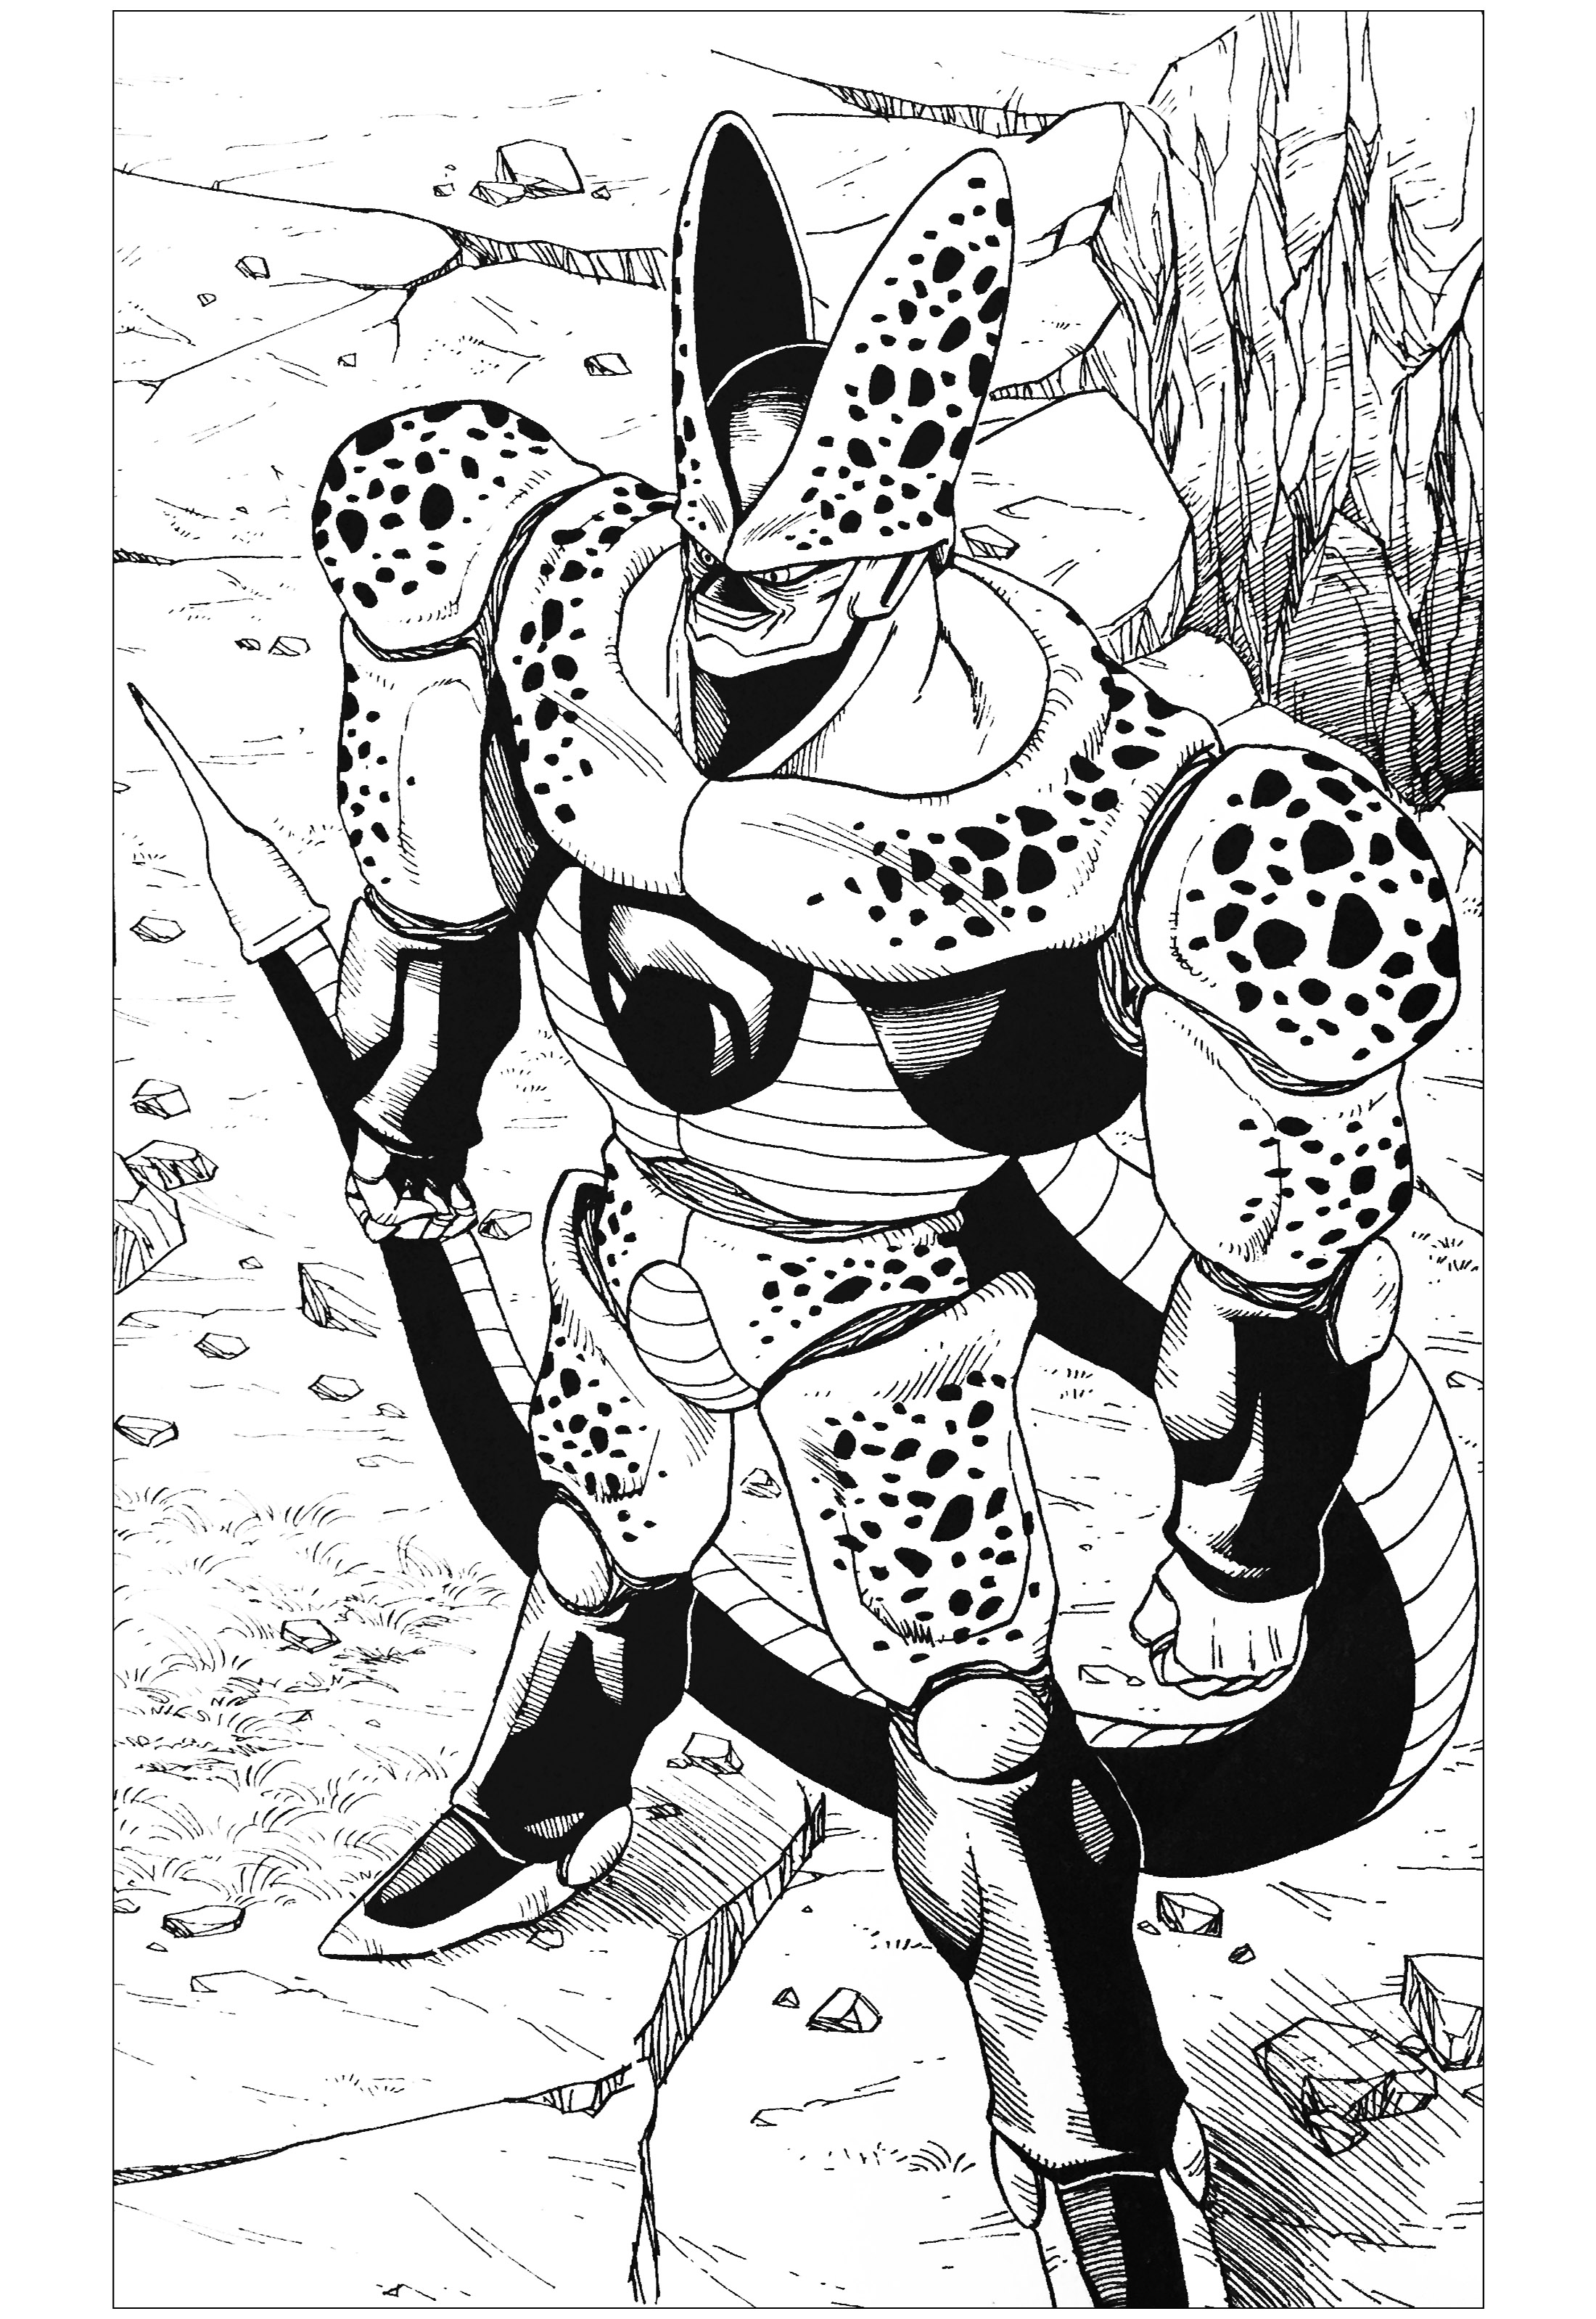 A Black & White drawing inspired by the character of Cell, in Dragon Ball Z